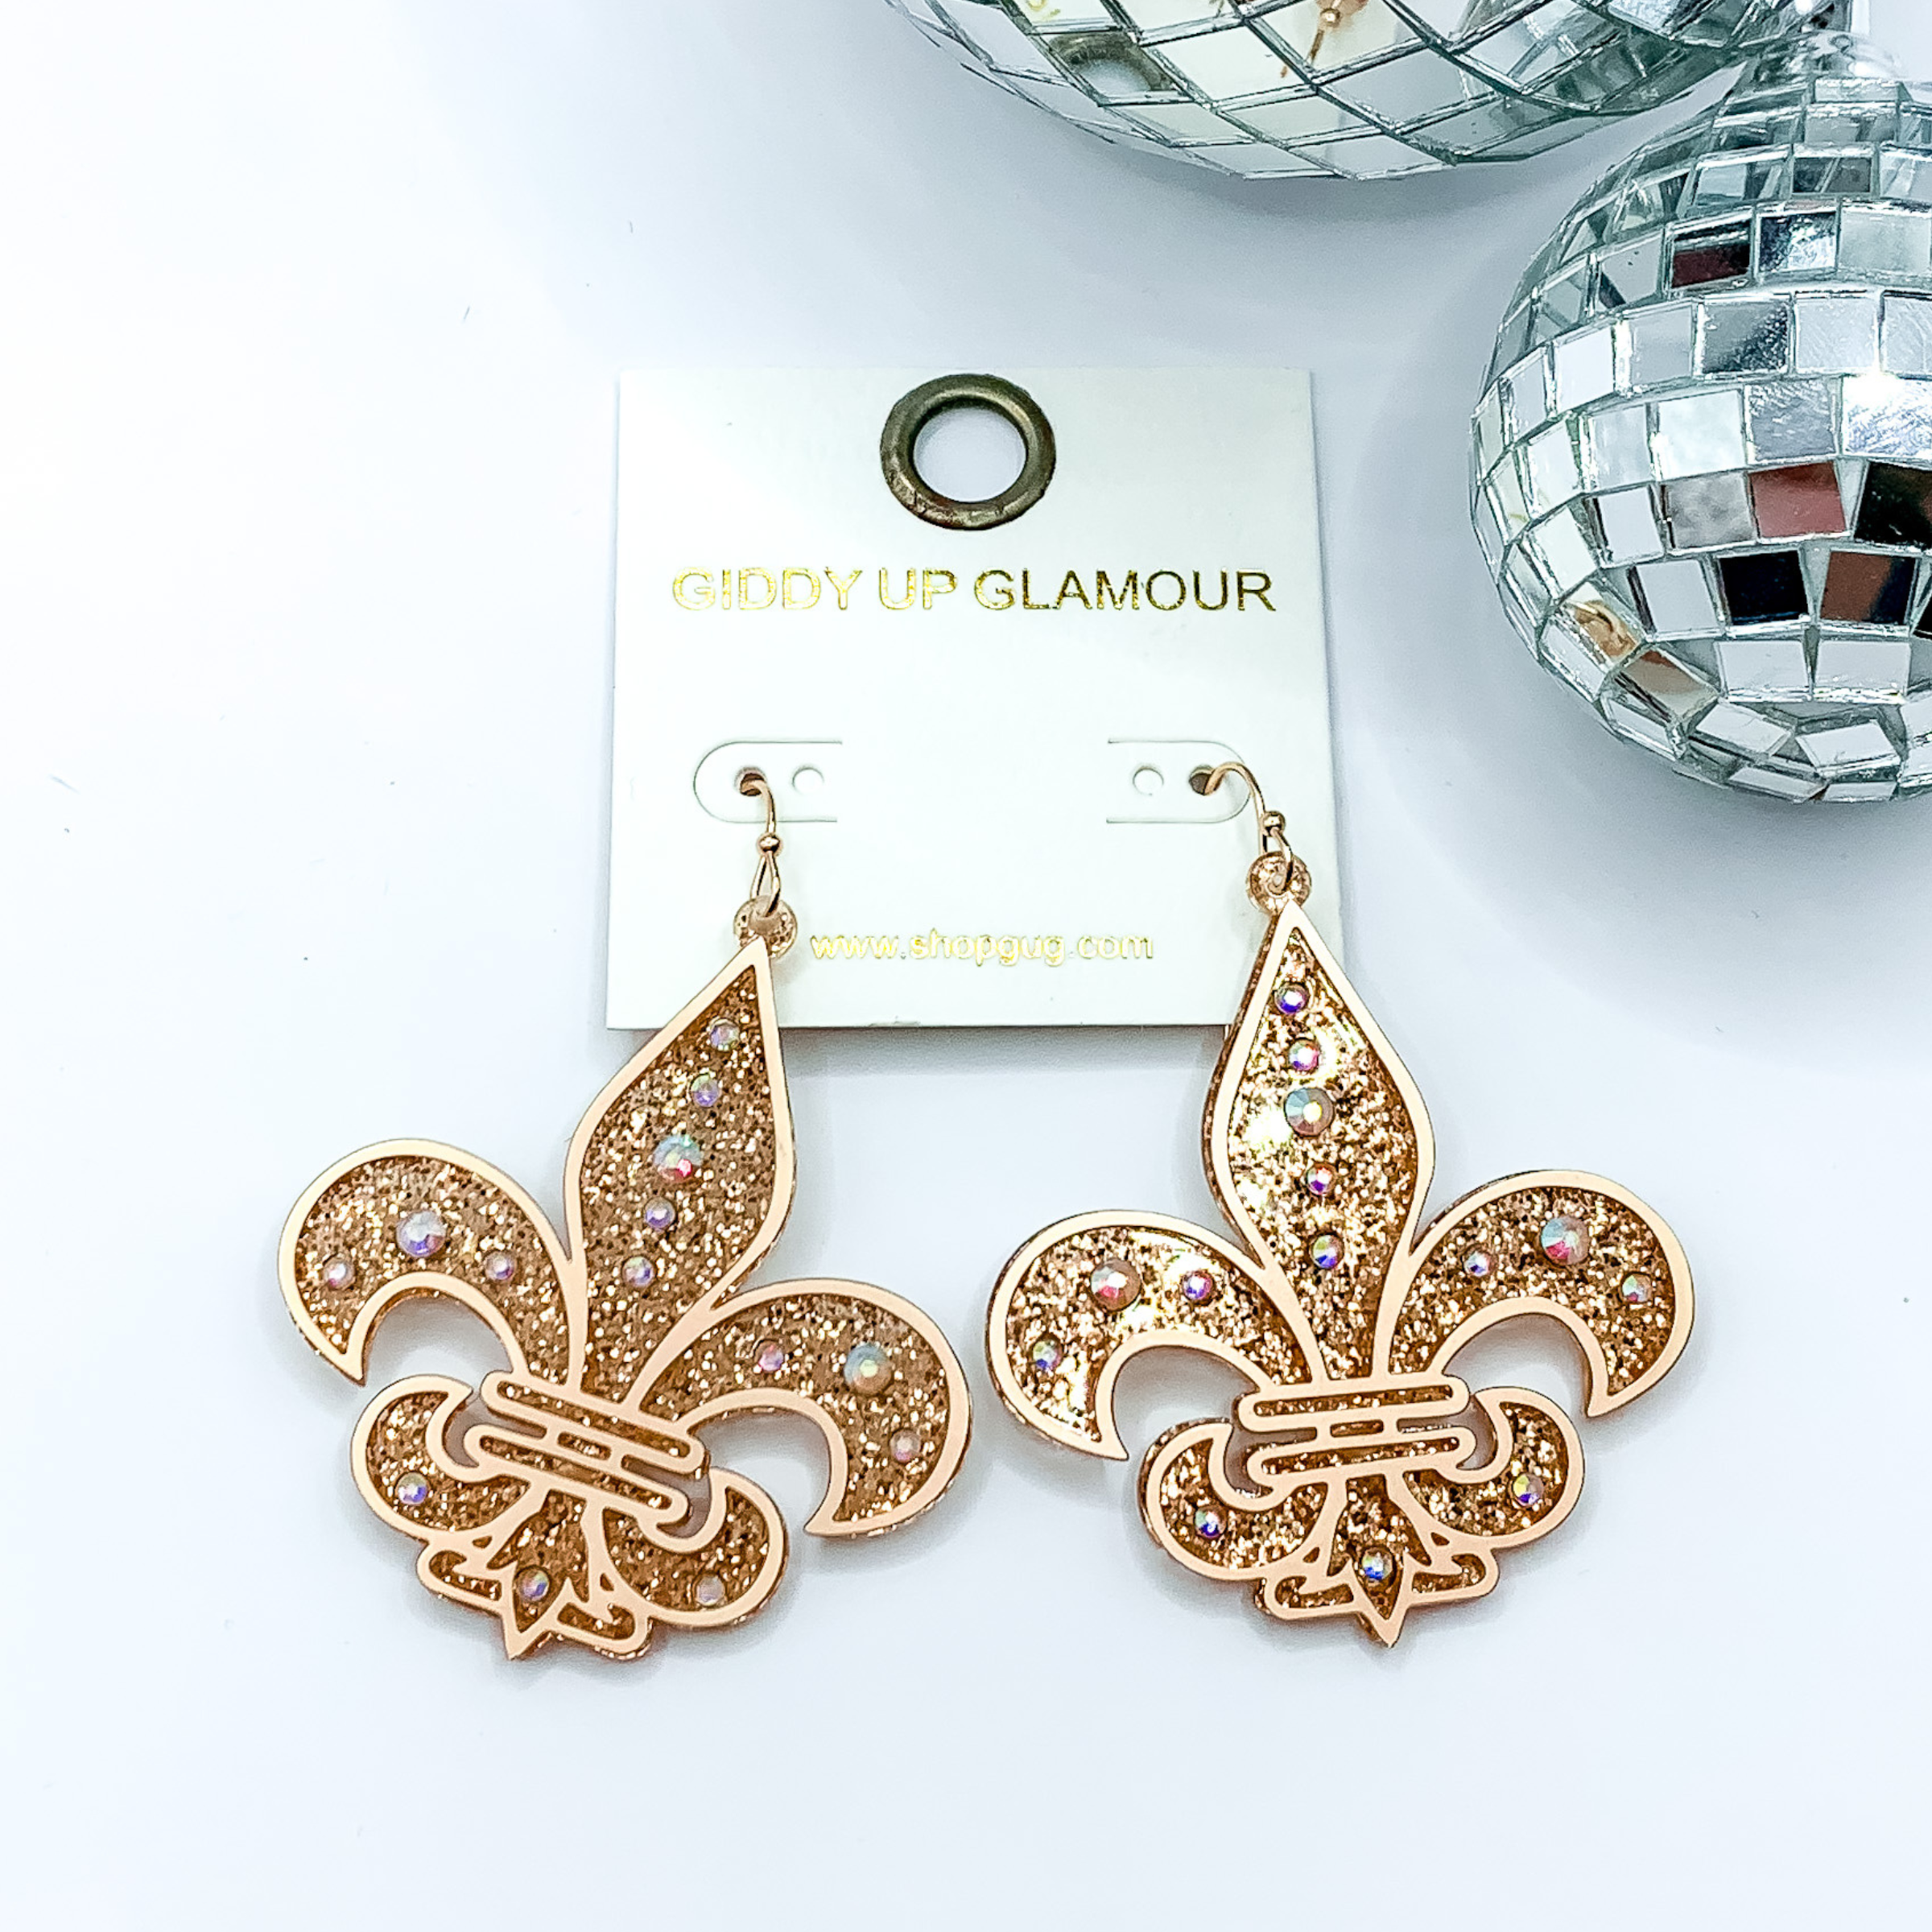 Gold glitter fleur de lis dangle earrings. These earrings include a gold outline and ab crystals. These earrings are pictured on a white background with disco balls in the top right corner.